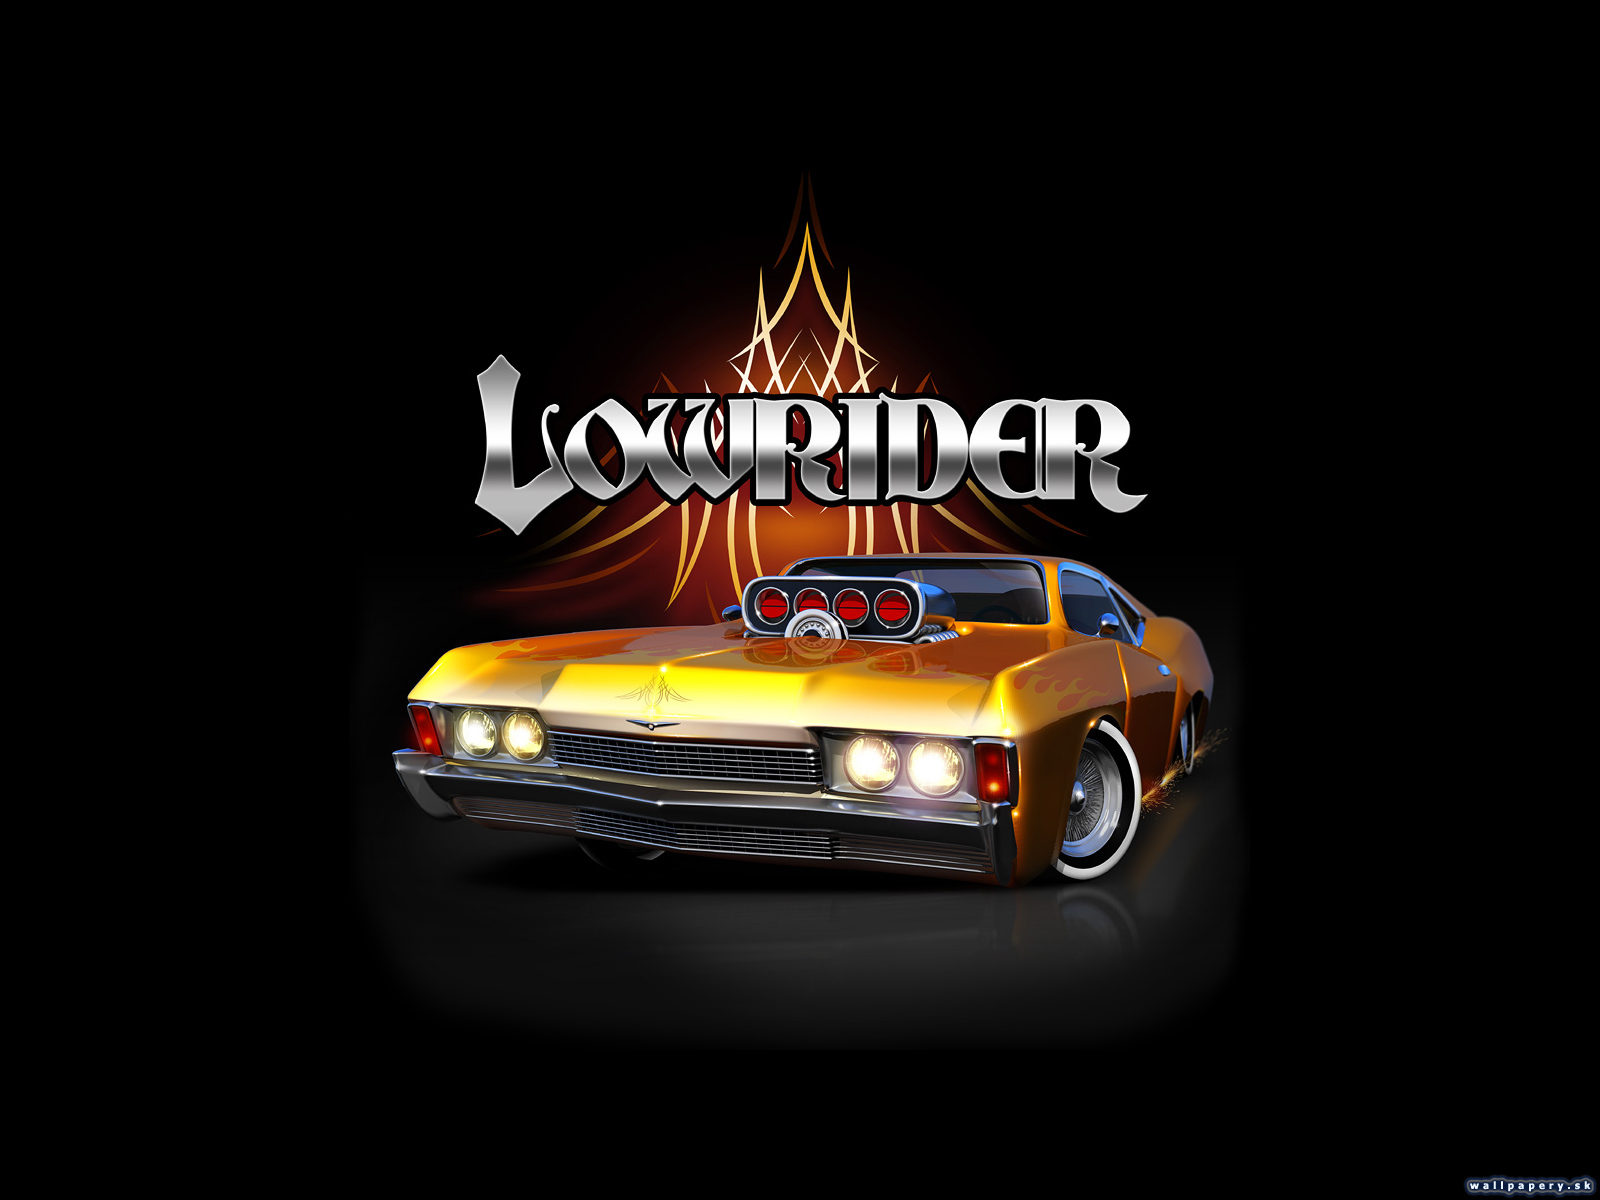 LowRider Extreme - wallpaper 3